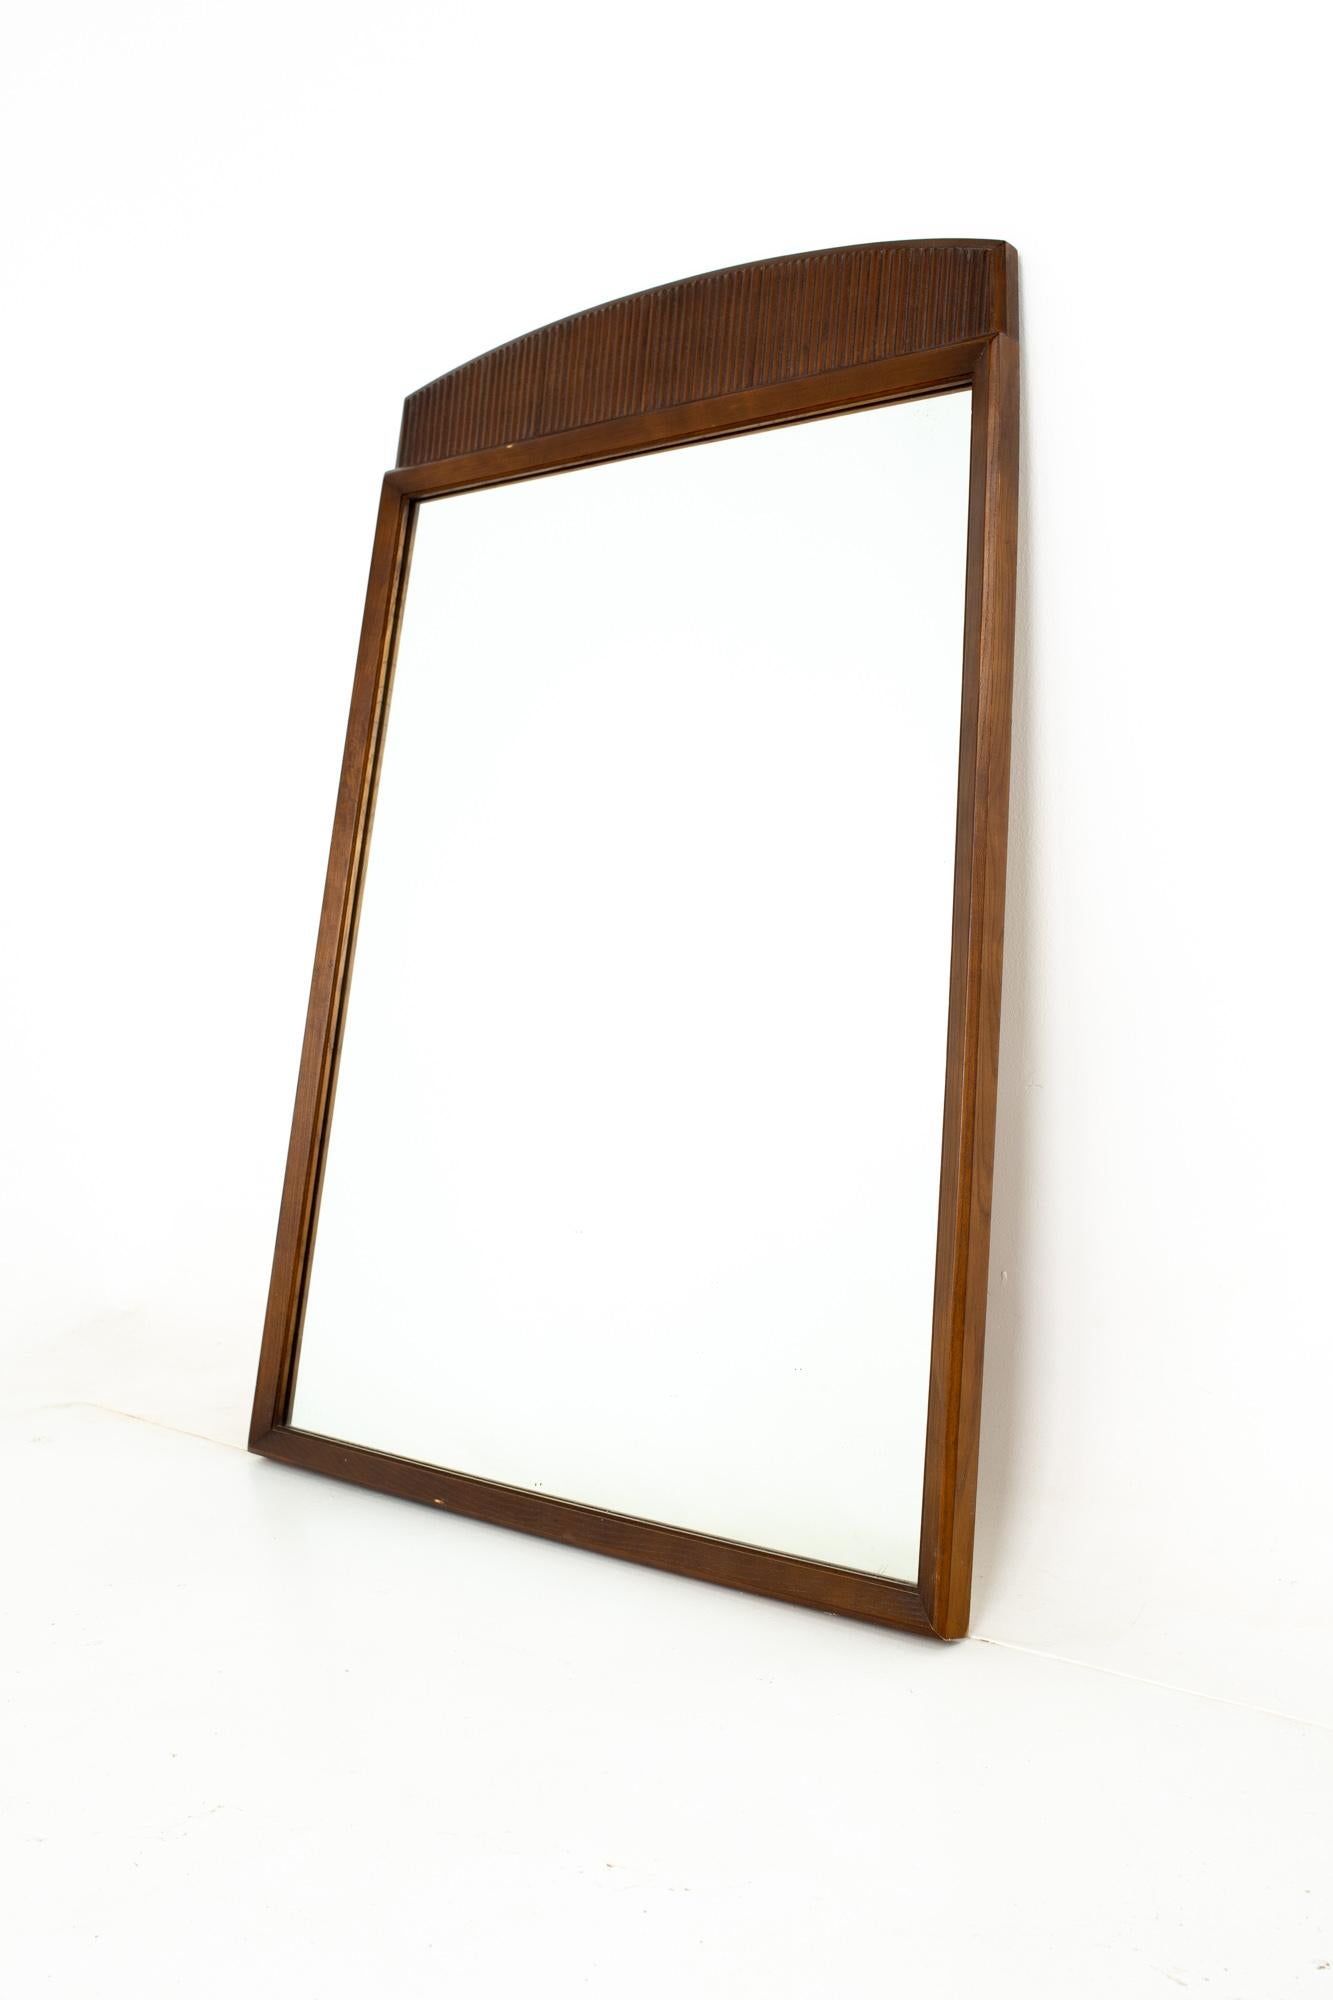 Lane first edition mid century walnut mirror
Mirror measures: 32 wide x 1.5 deep x 43.5 inches high

All pieces of furniture can be had in what we call restored vintage condition. That means the piece is restored upon purchase so it’s free of